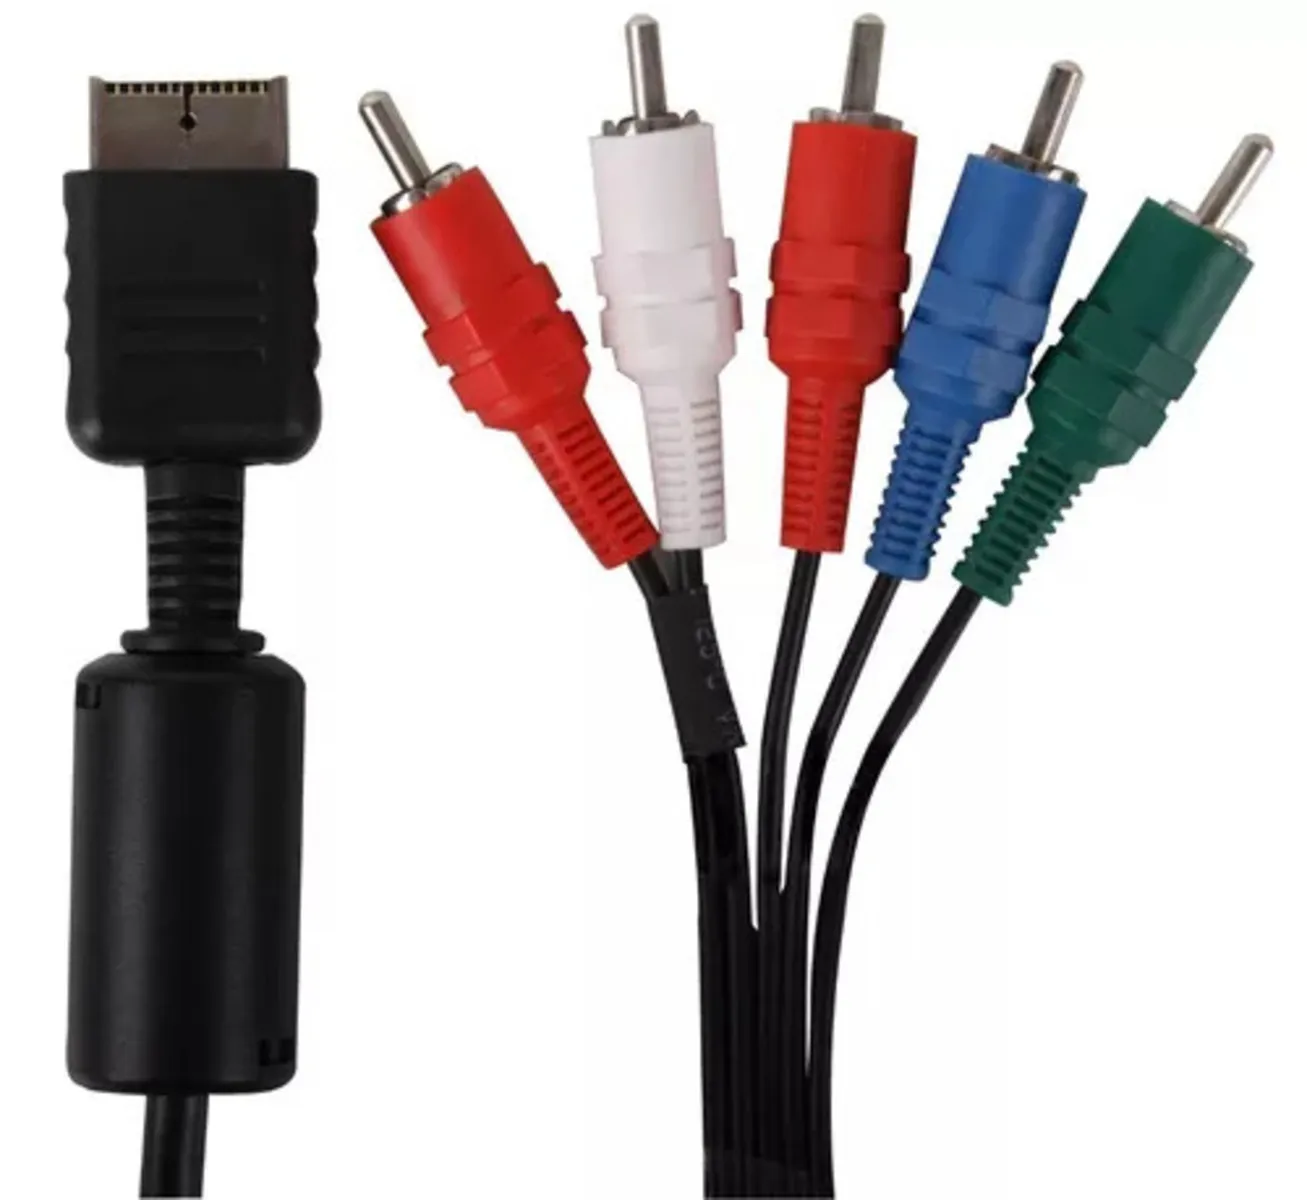 Cable Video Componente Para Ps2 Y Ps3 Ideal Lcd Led Smart Tv